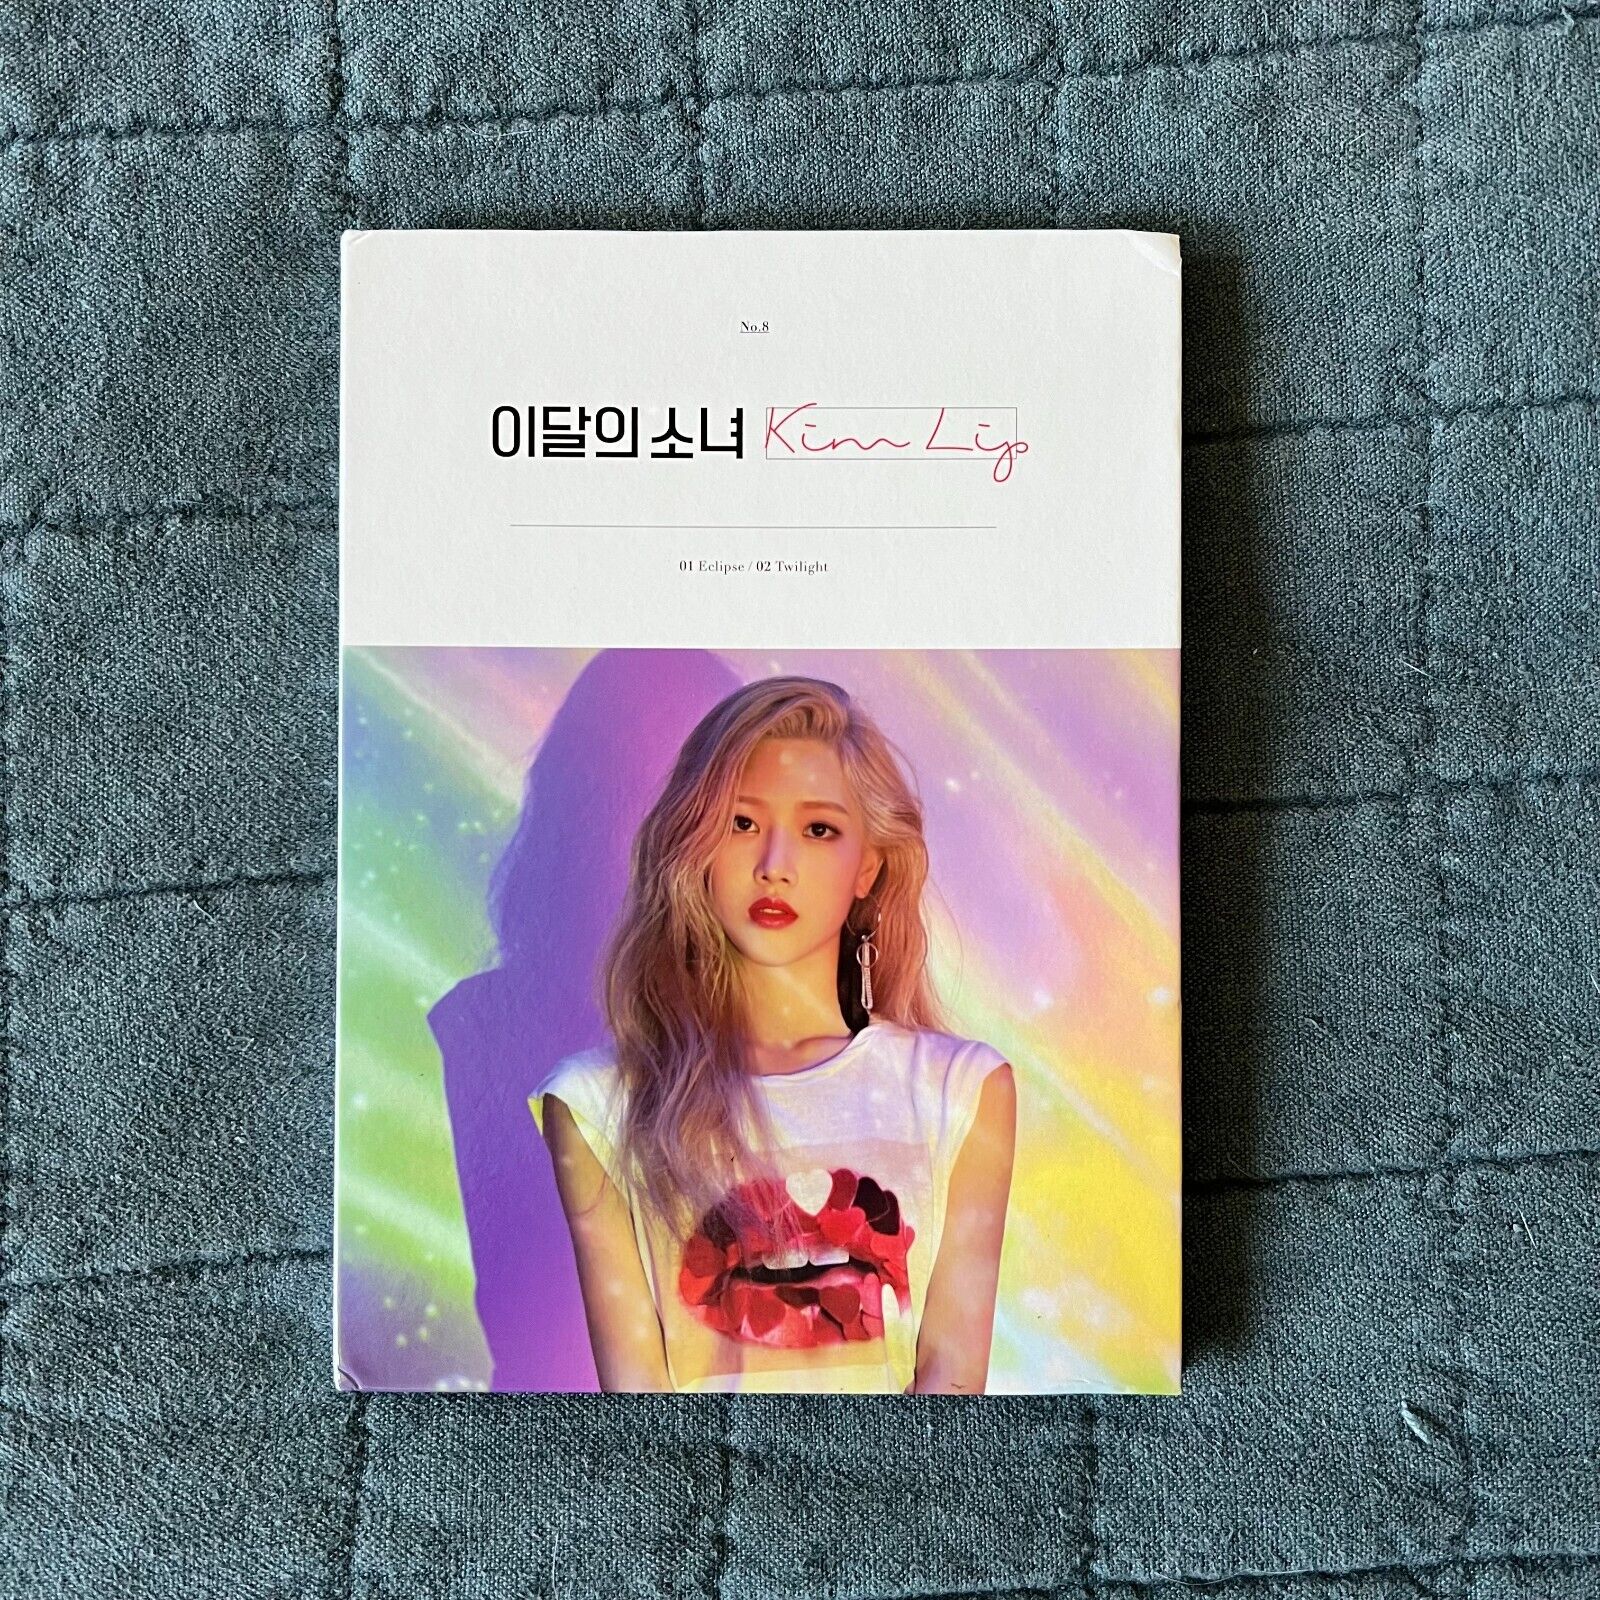 LOONA Albums Unsealed No Photocard (++, 12:00, &, Flip That)